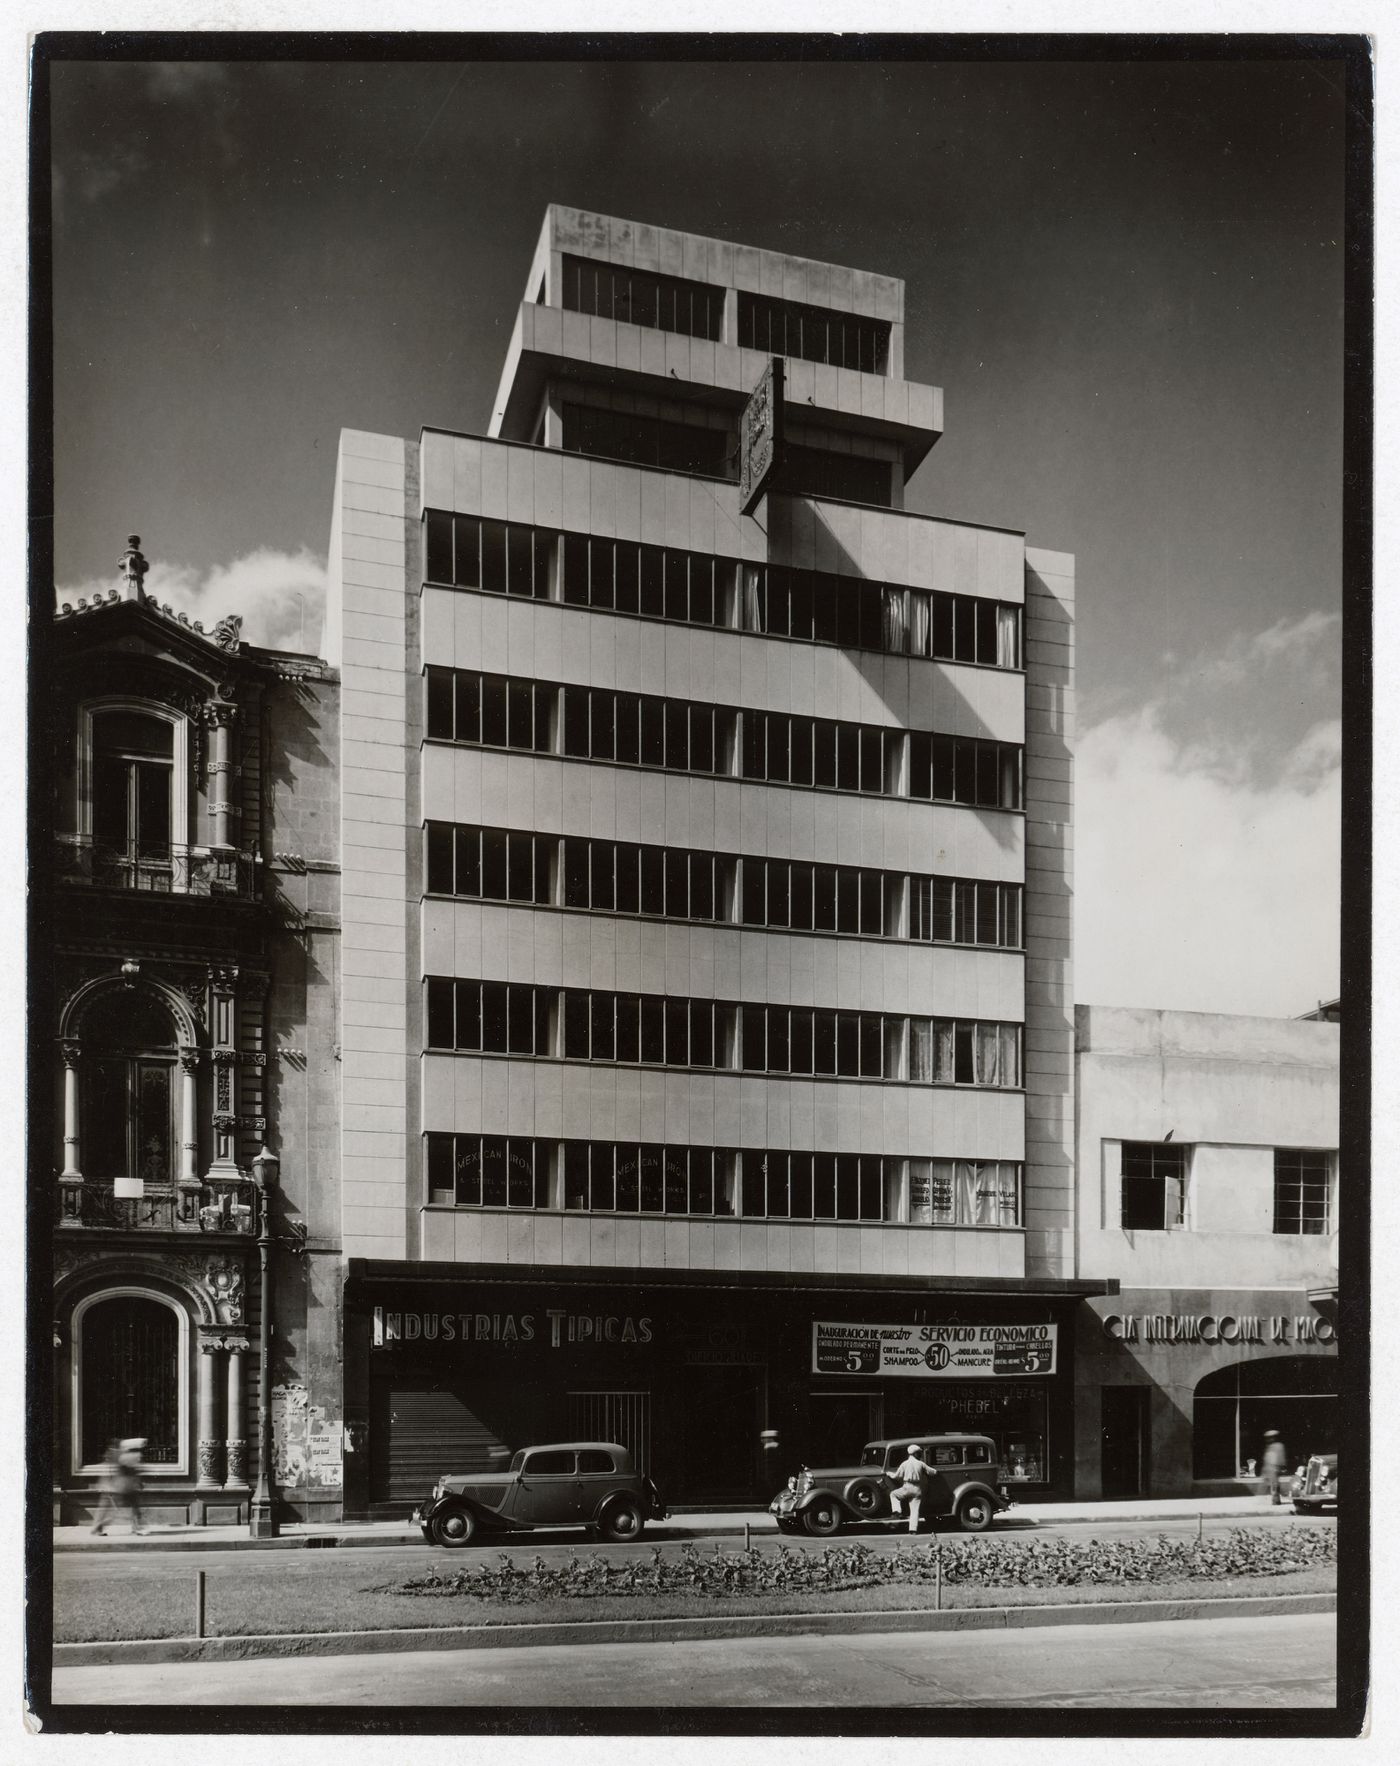 View of 60 avenue Jaurez, remodeled by Kunhardt and Capilla